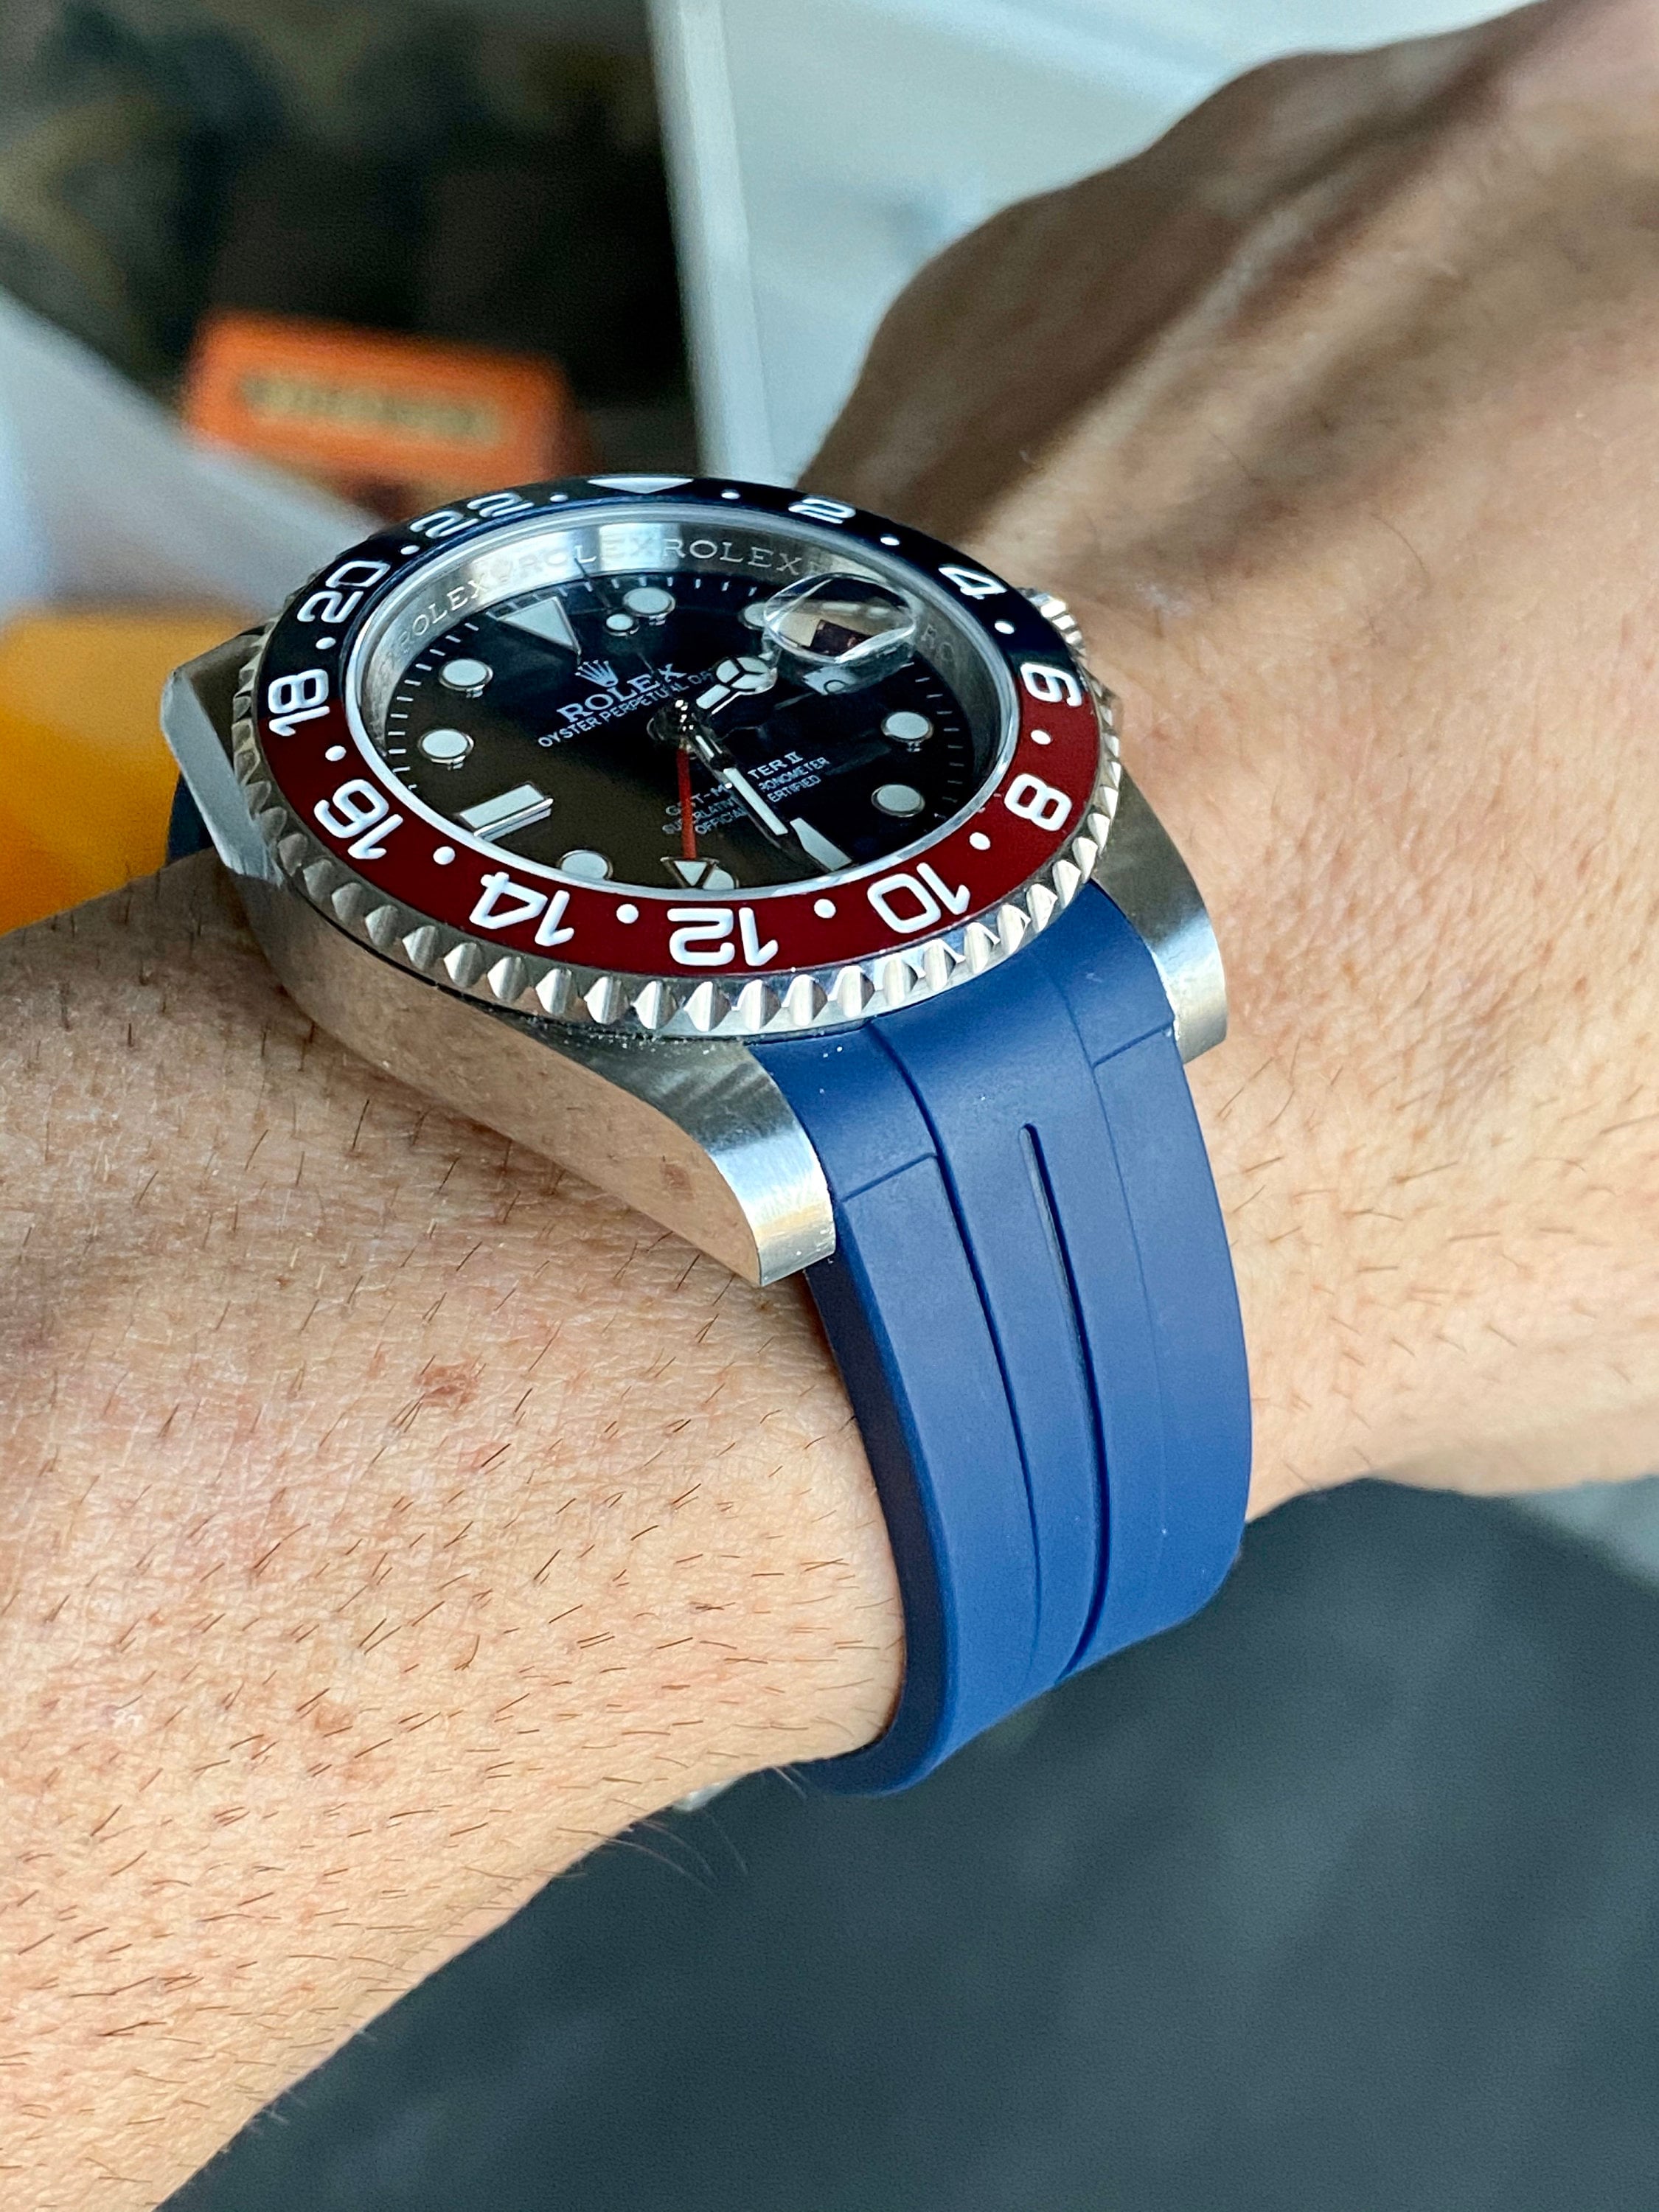 Rubber strap on Yachtmaster blue - suggestions pls - Rolex Forums